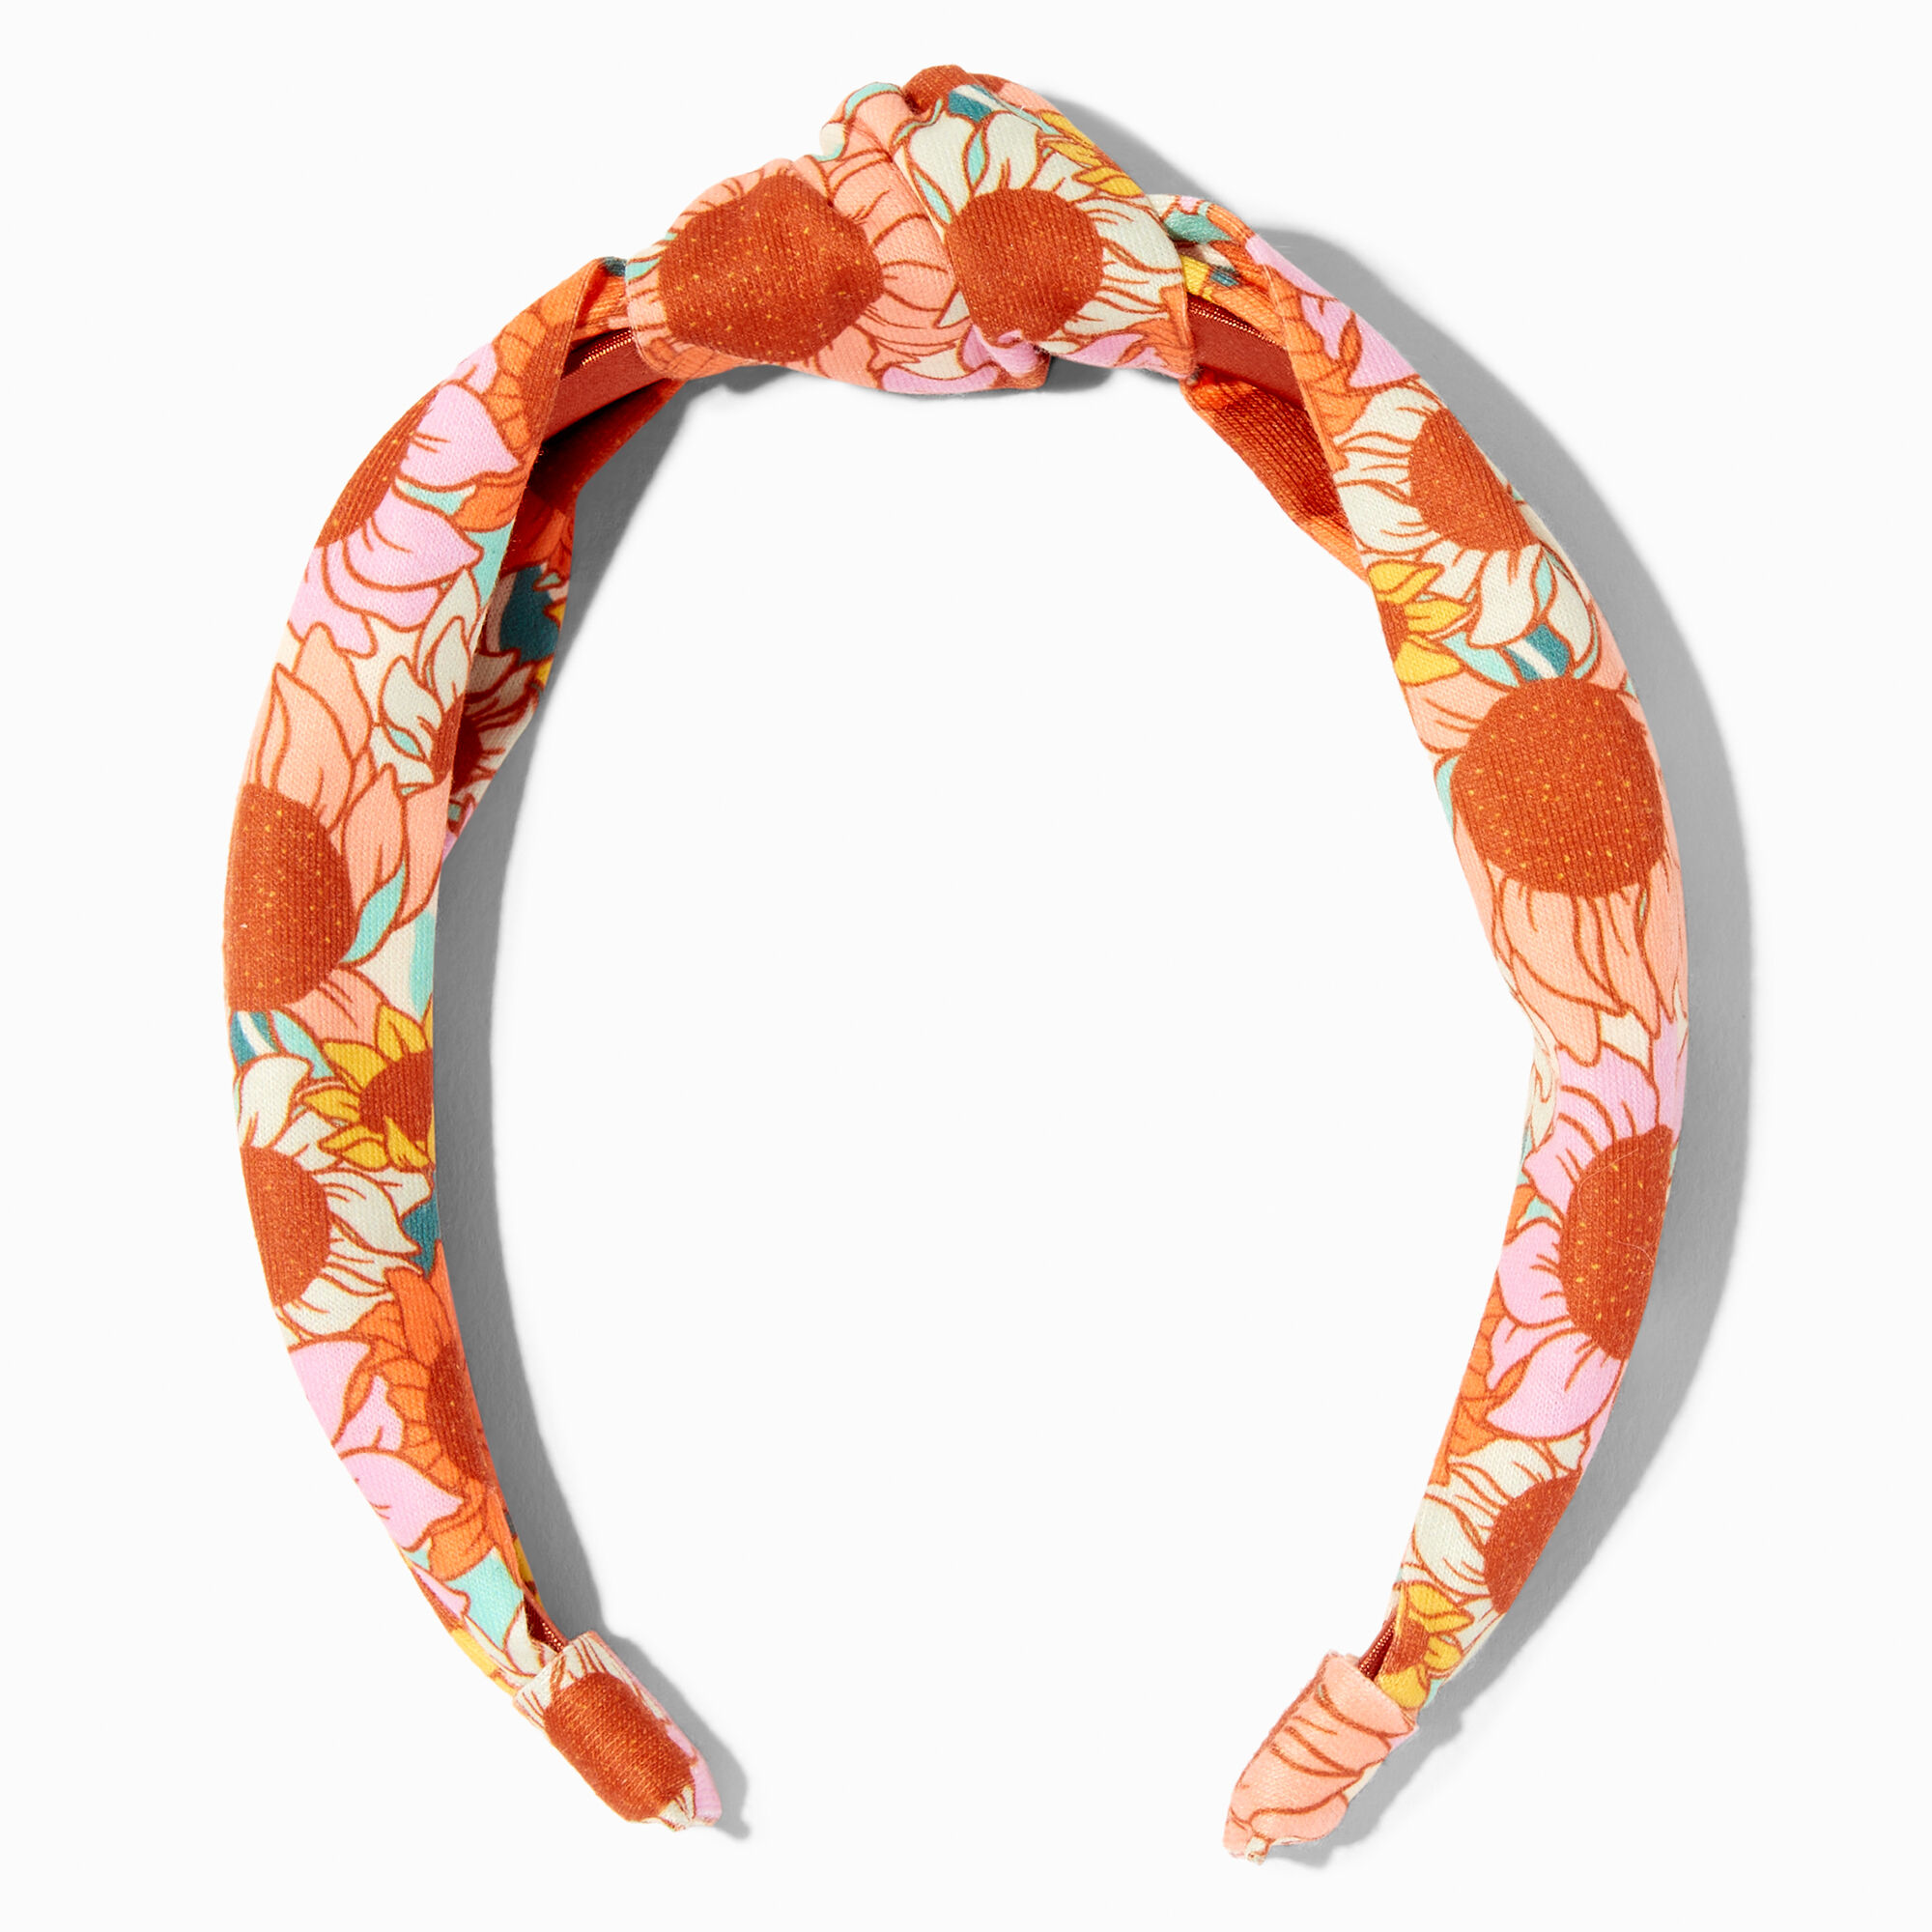 View Claires Sunflower Print Knotted Headband information